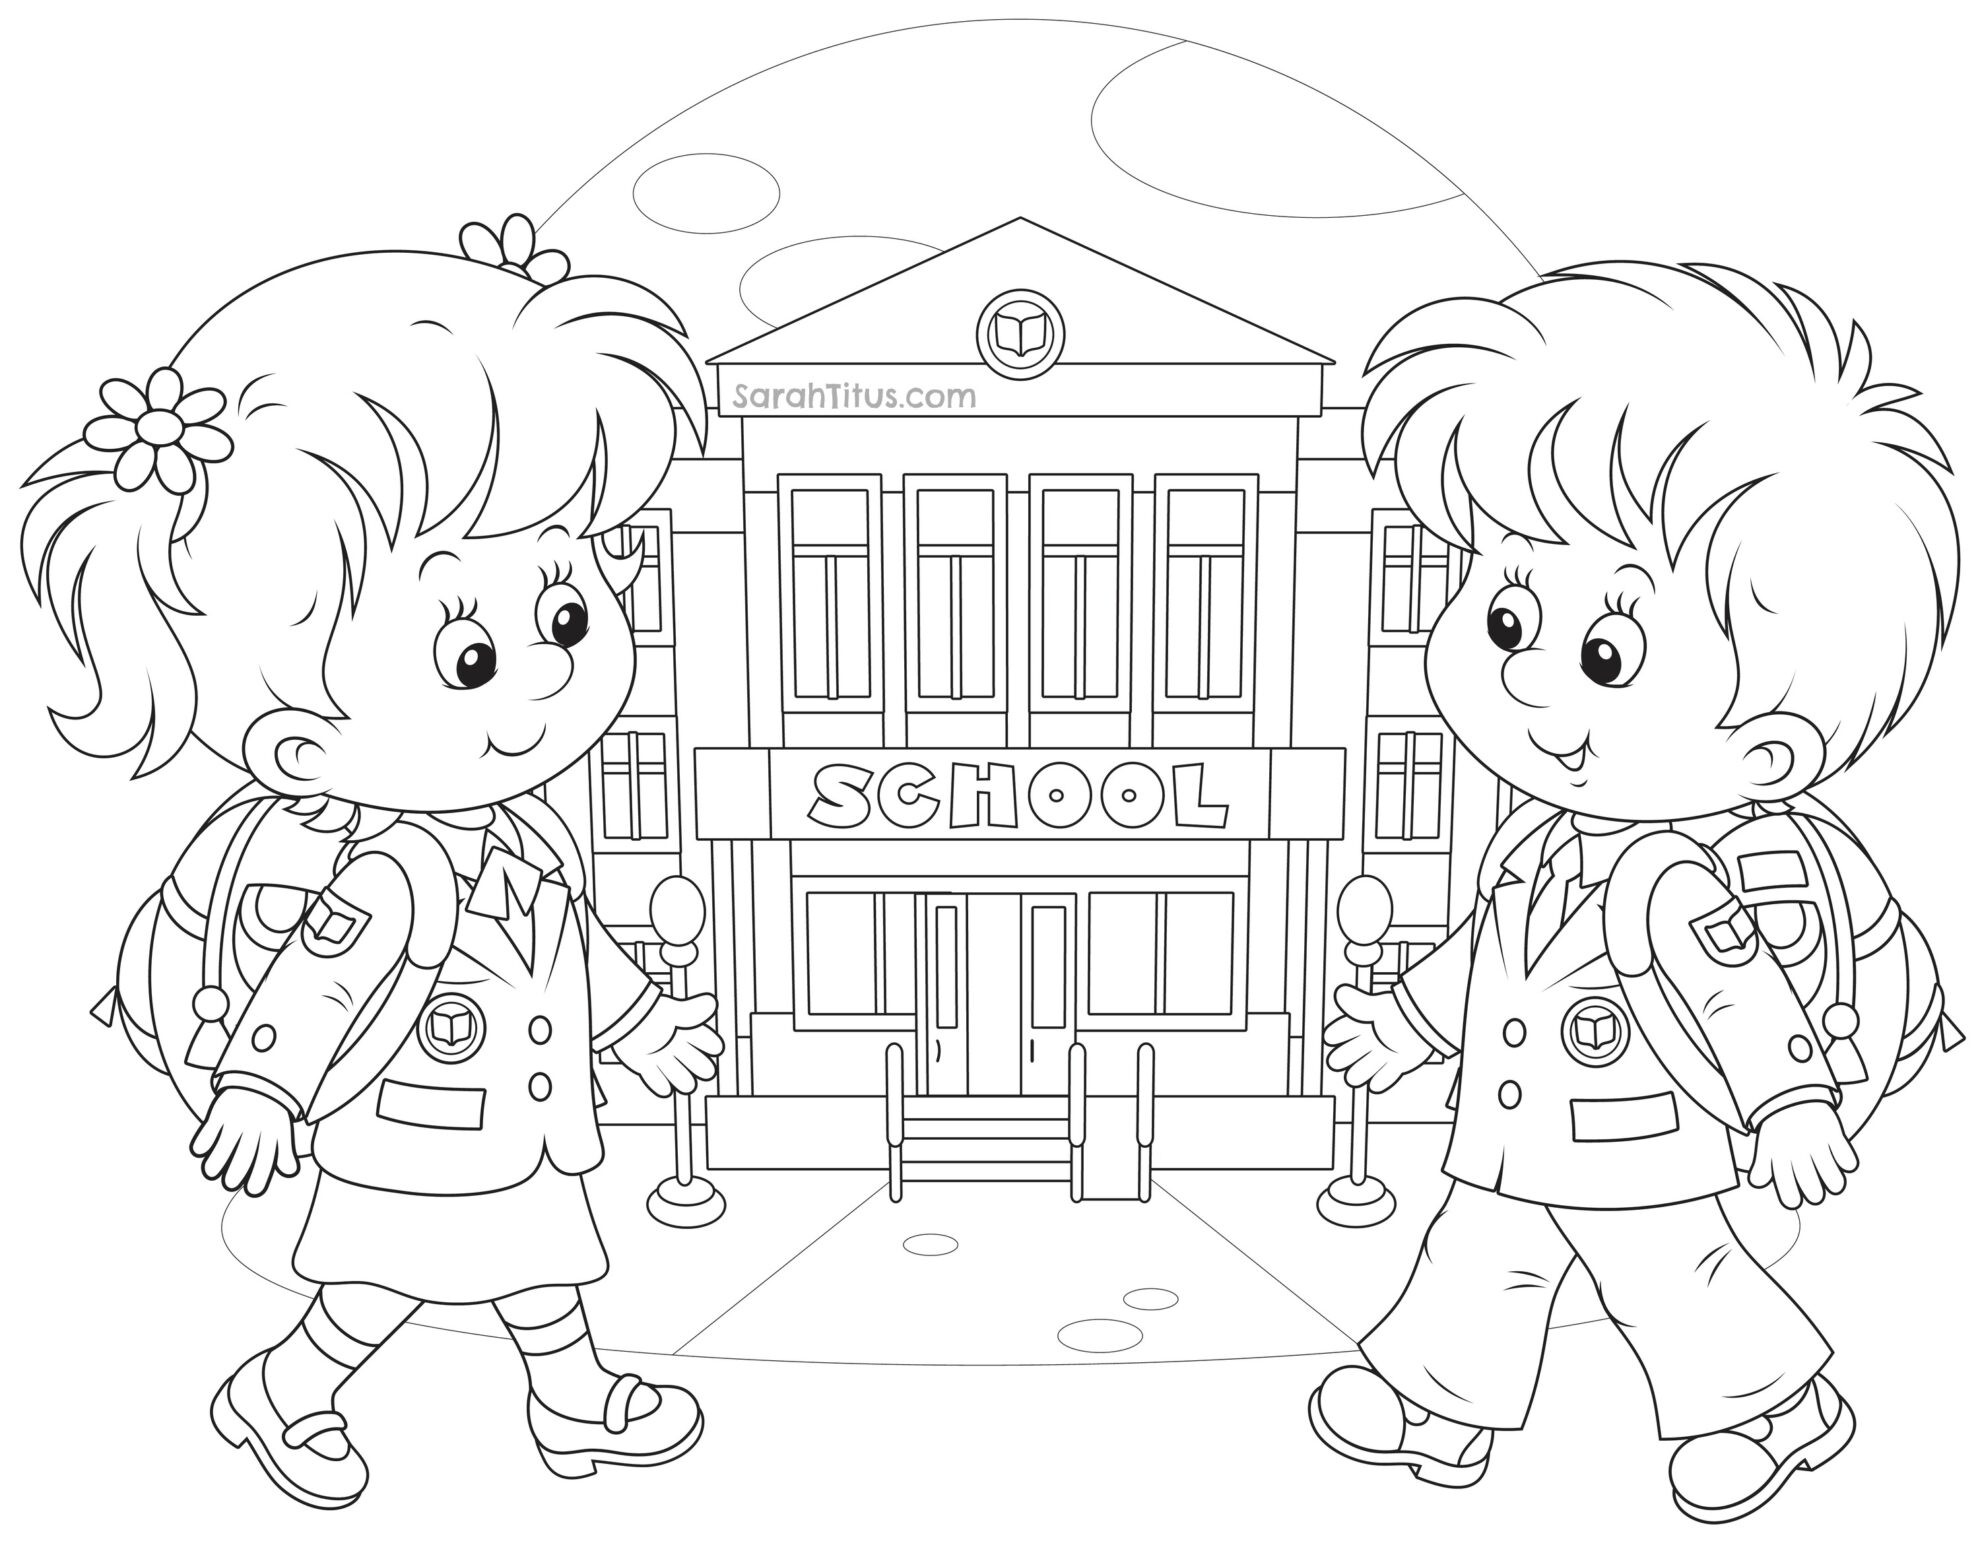 School Coloring Pages Printable
 Back to School Coloring Pages Sarah Titus